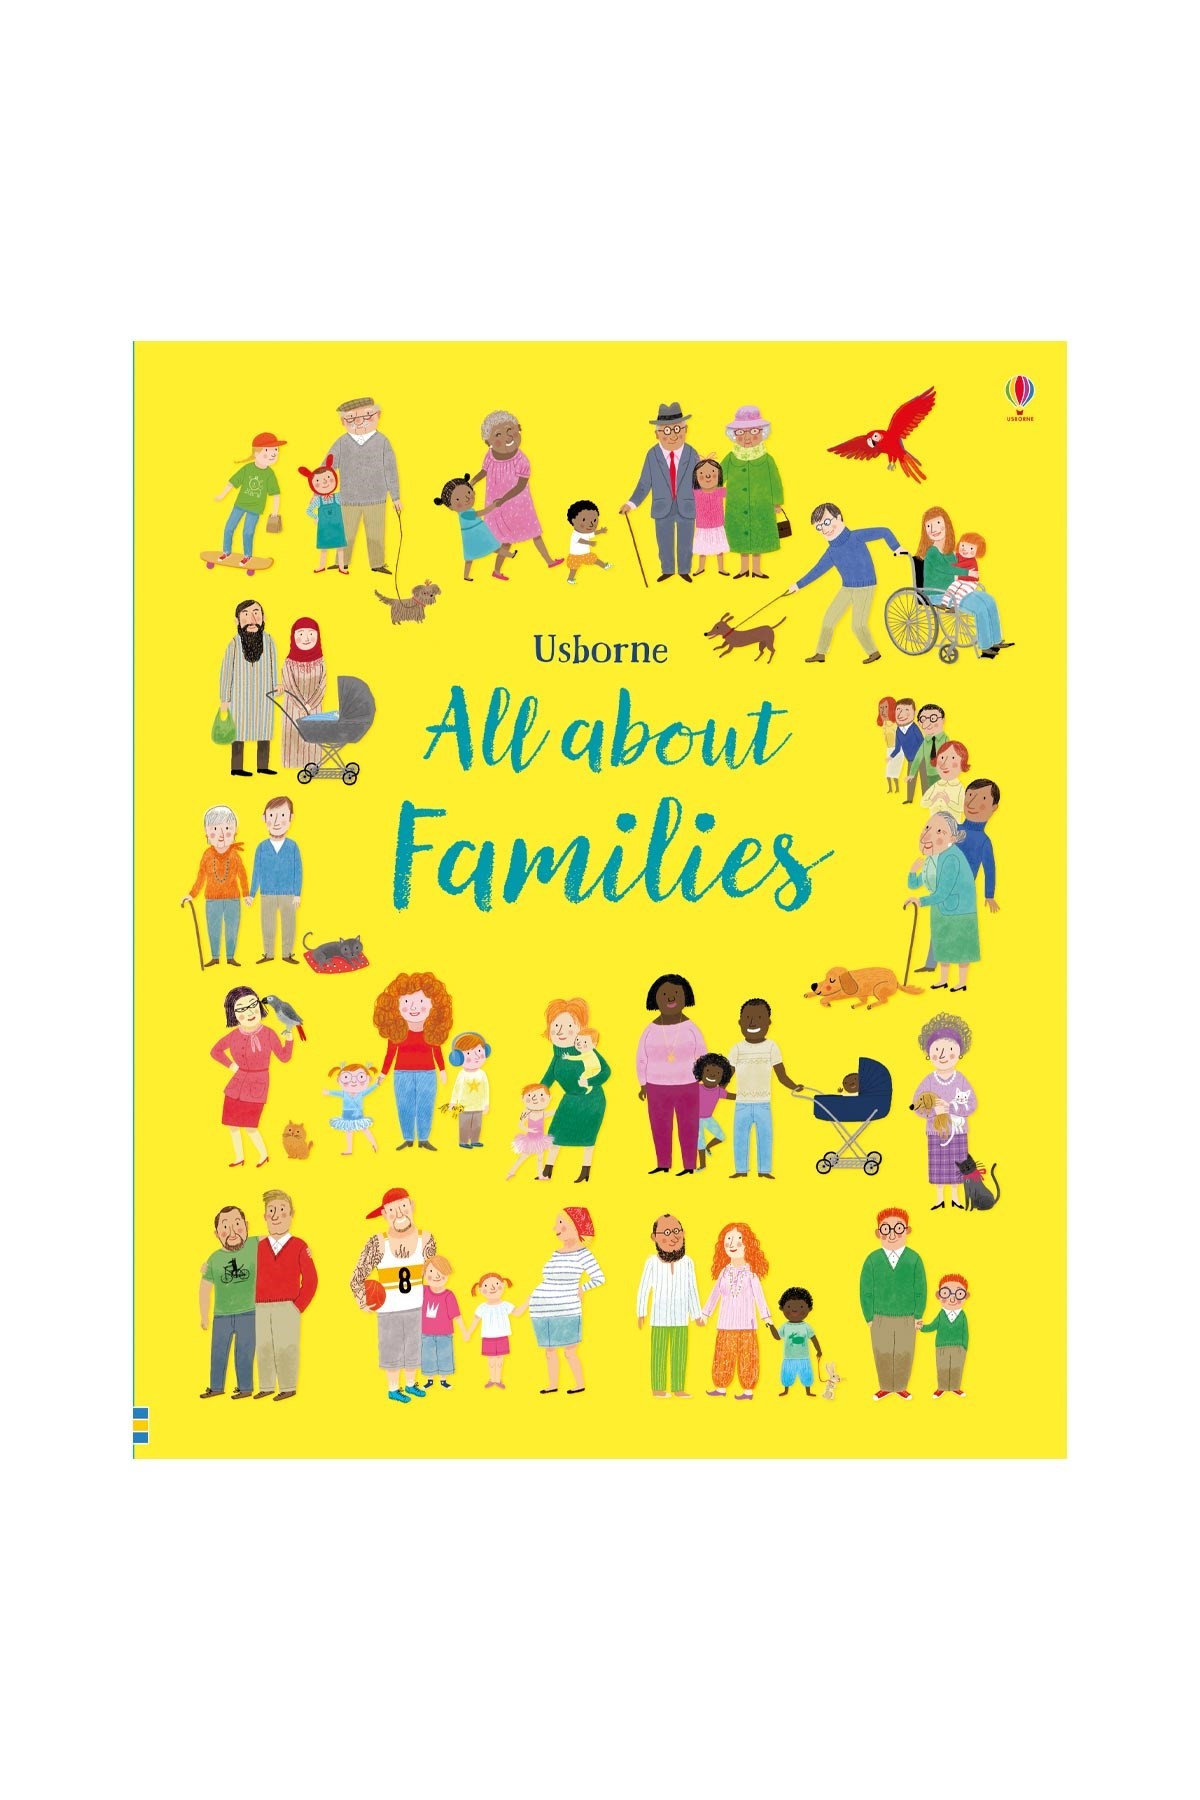 The Usborne All About Families